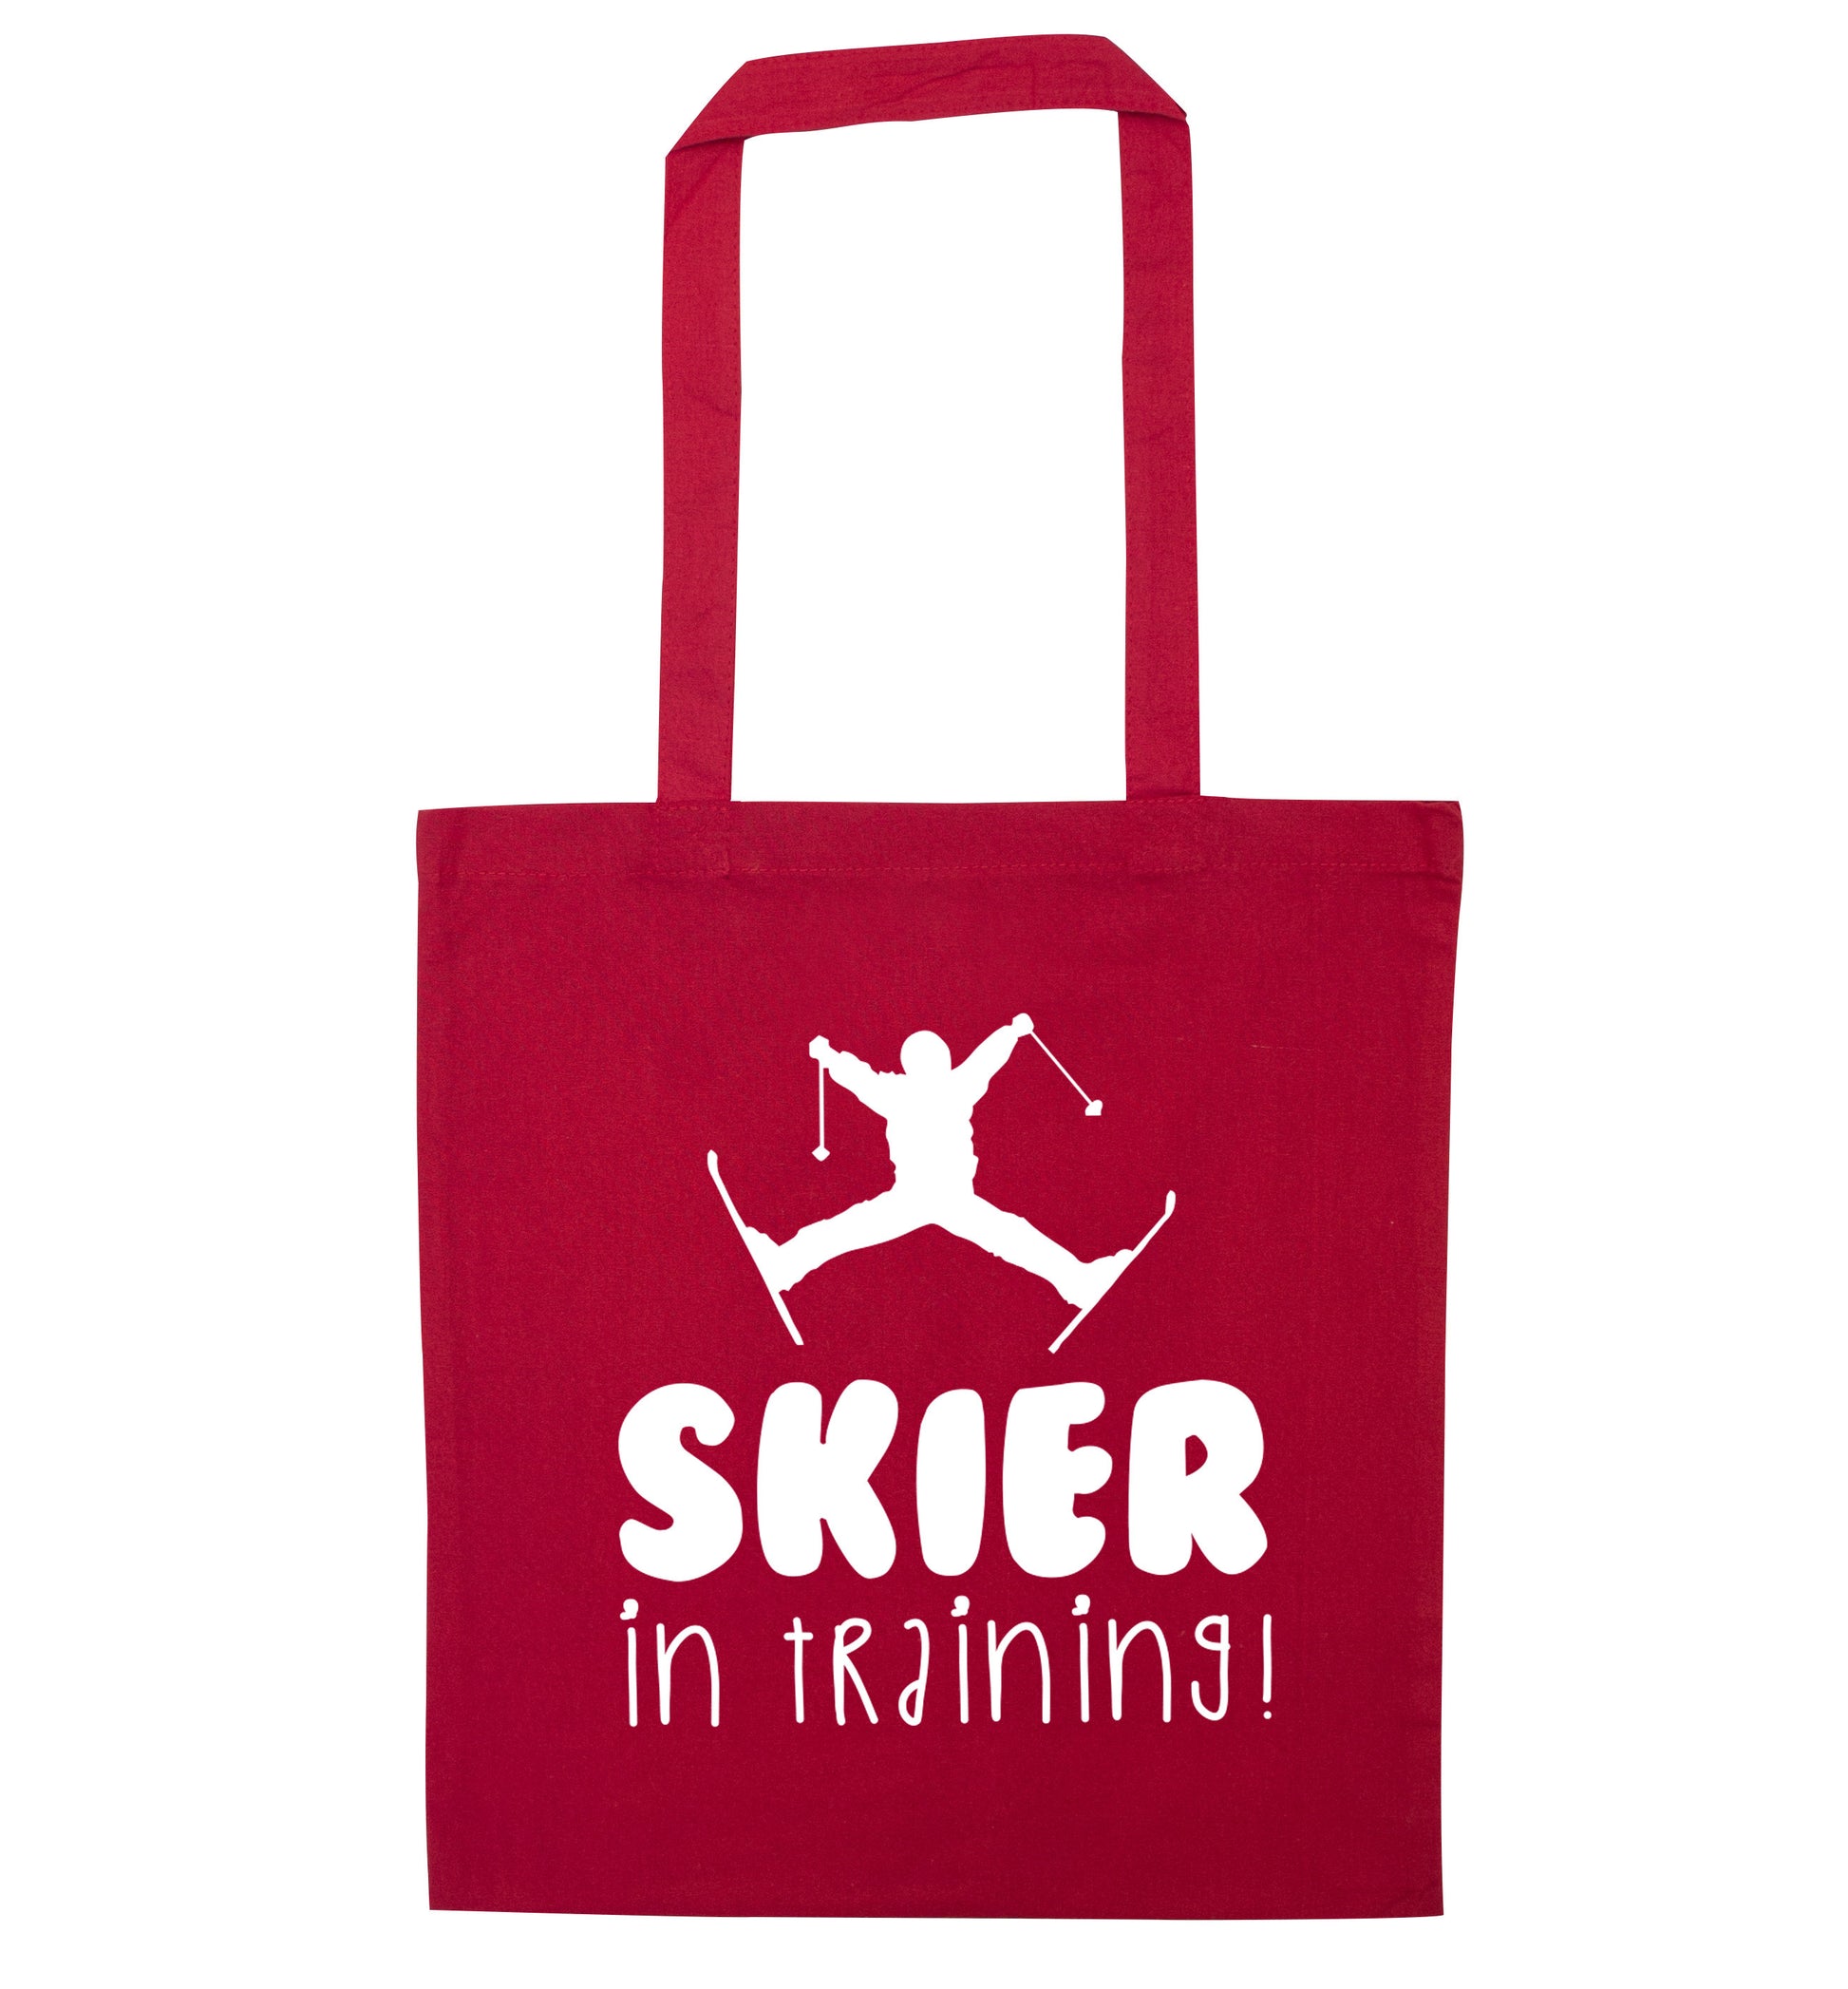 Skier in training red tote bag